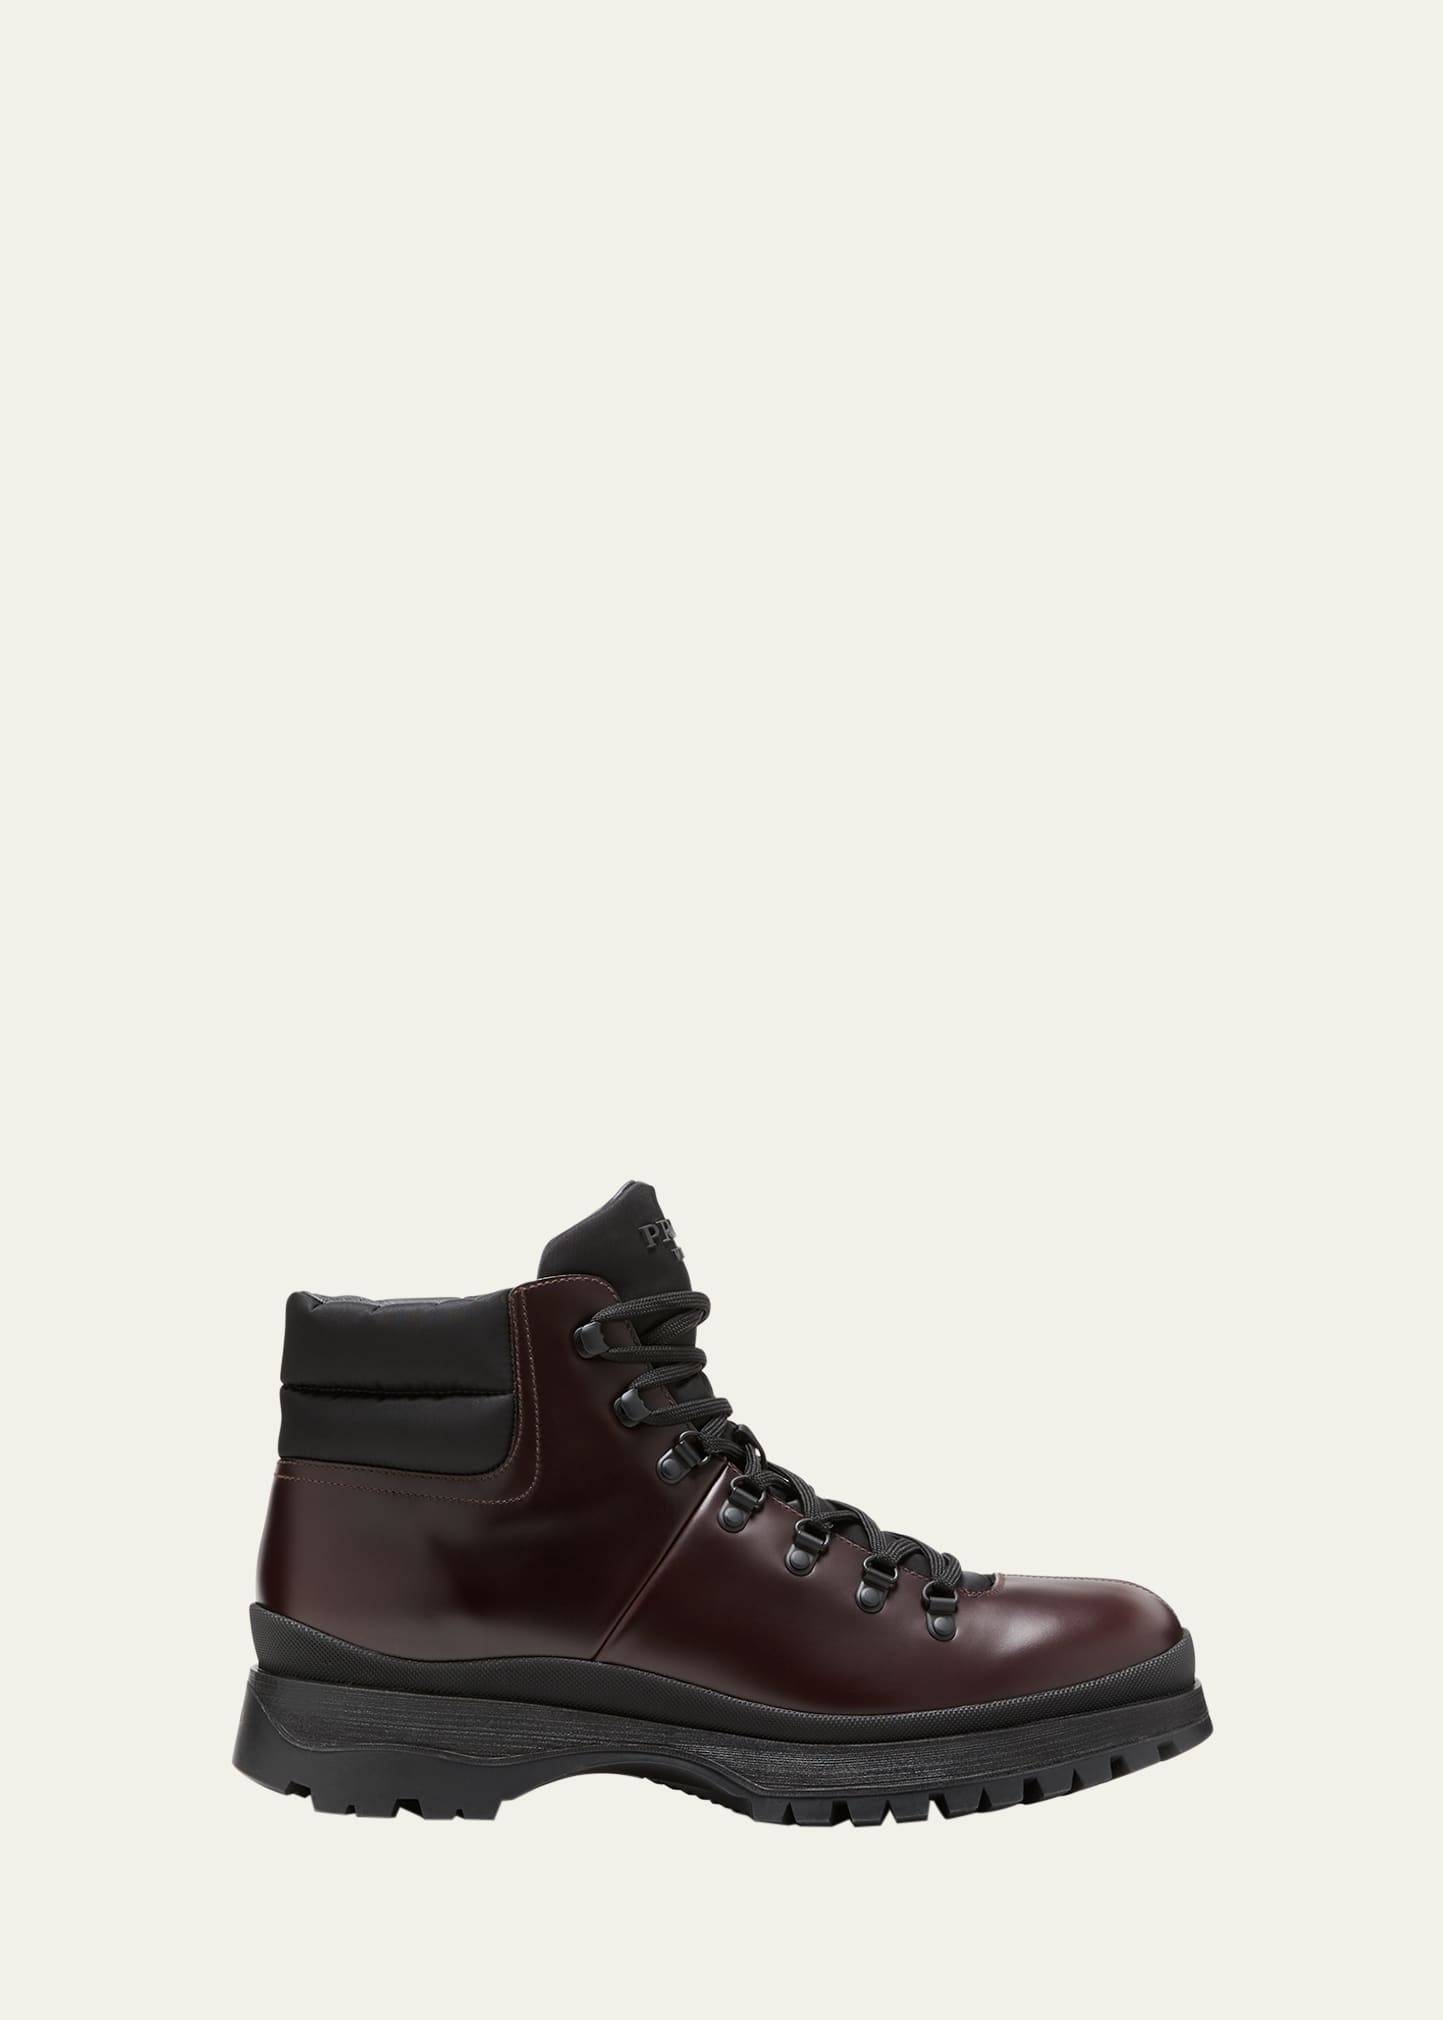 Men's Brucciato Leather Lace-Up Hiking Boots